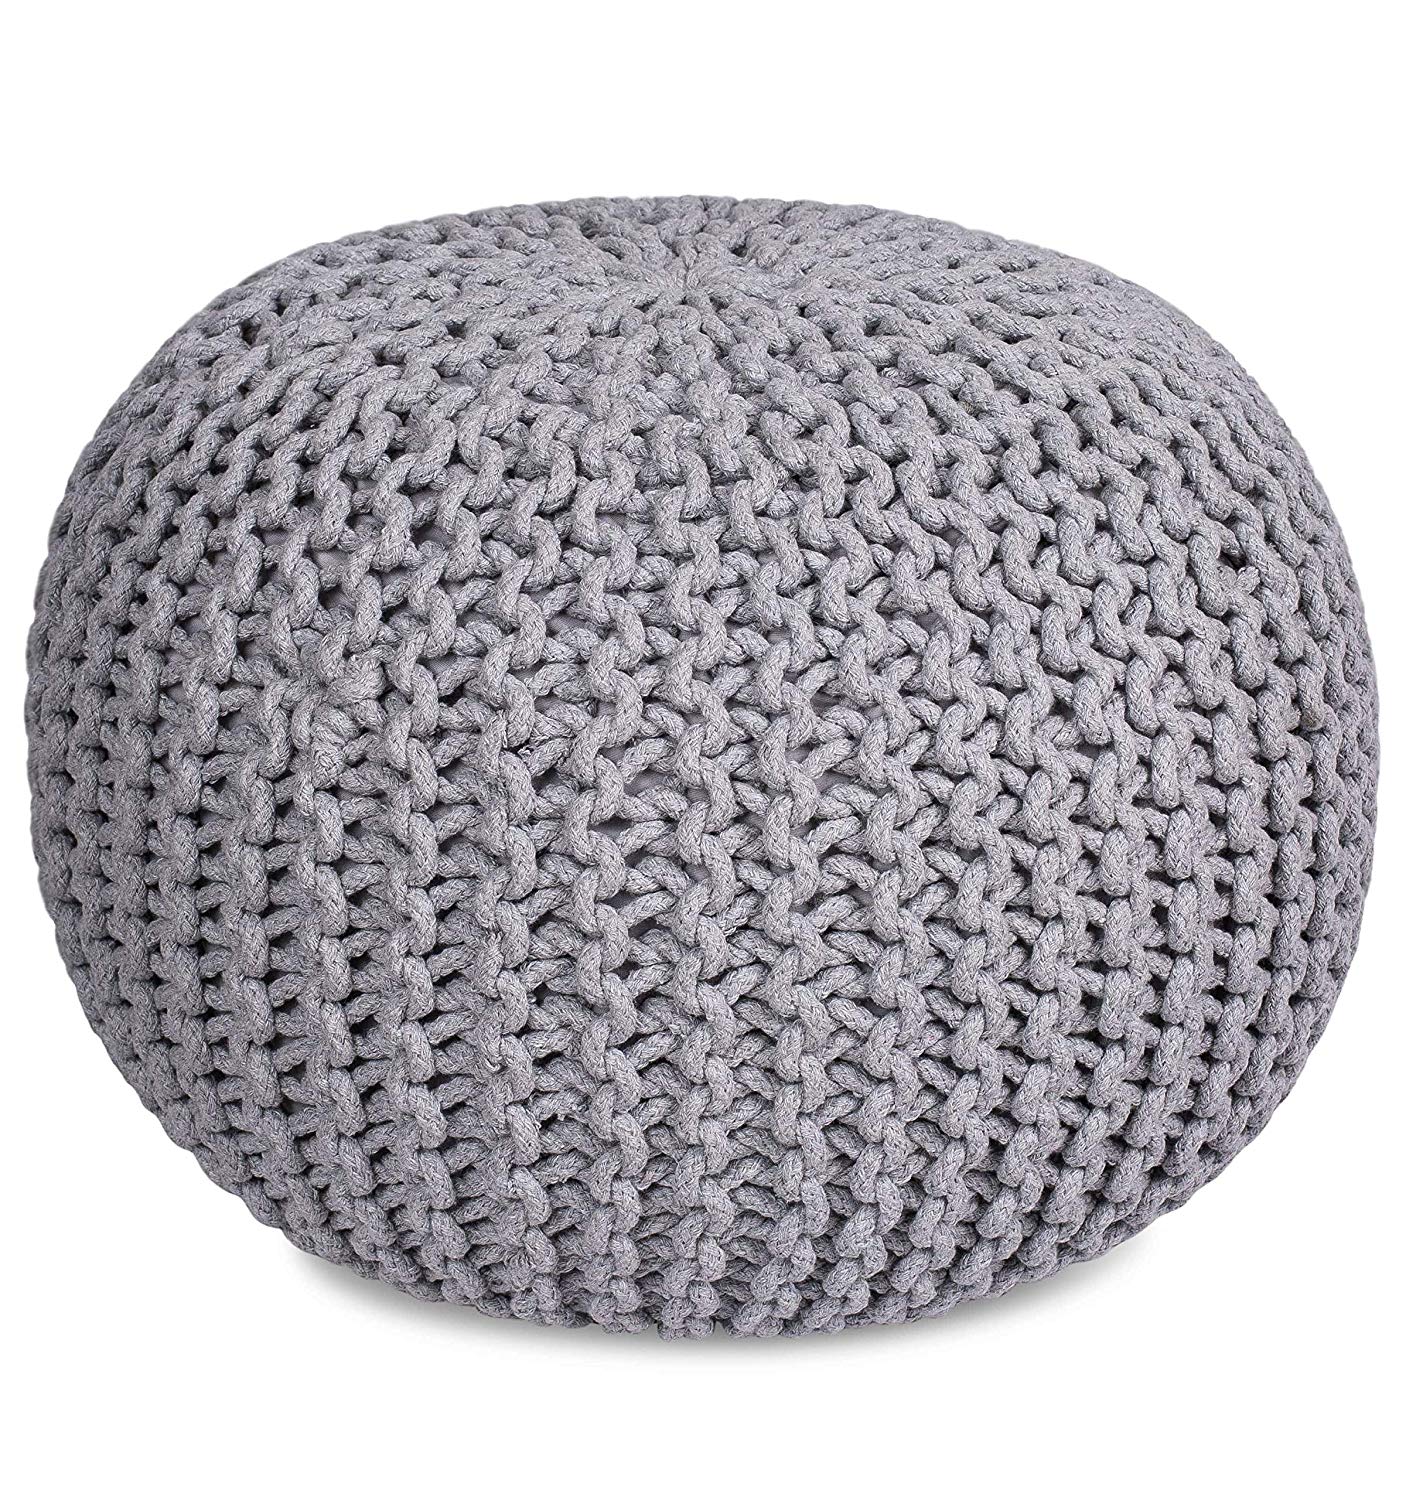 Details about  / Large Selection Pouf Ottoman Cover pouffe Foot Stool Moroccan Seat Ottoman Throw